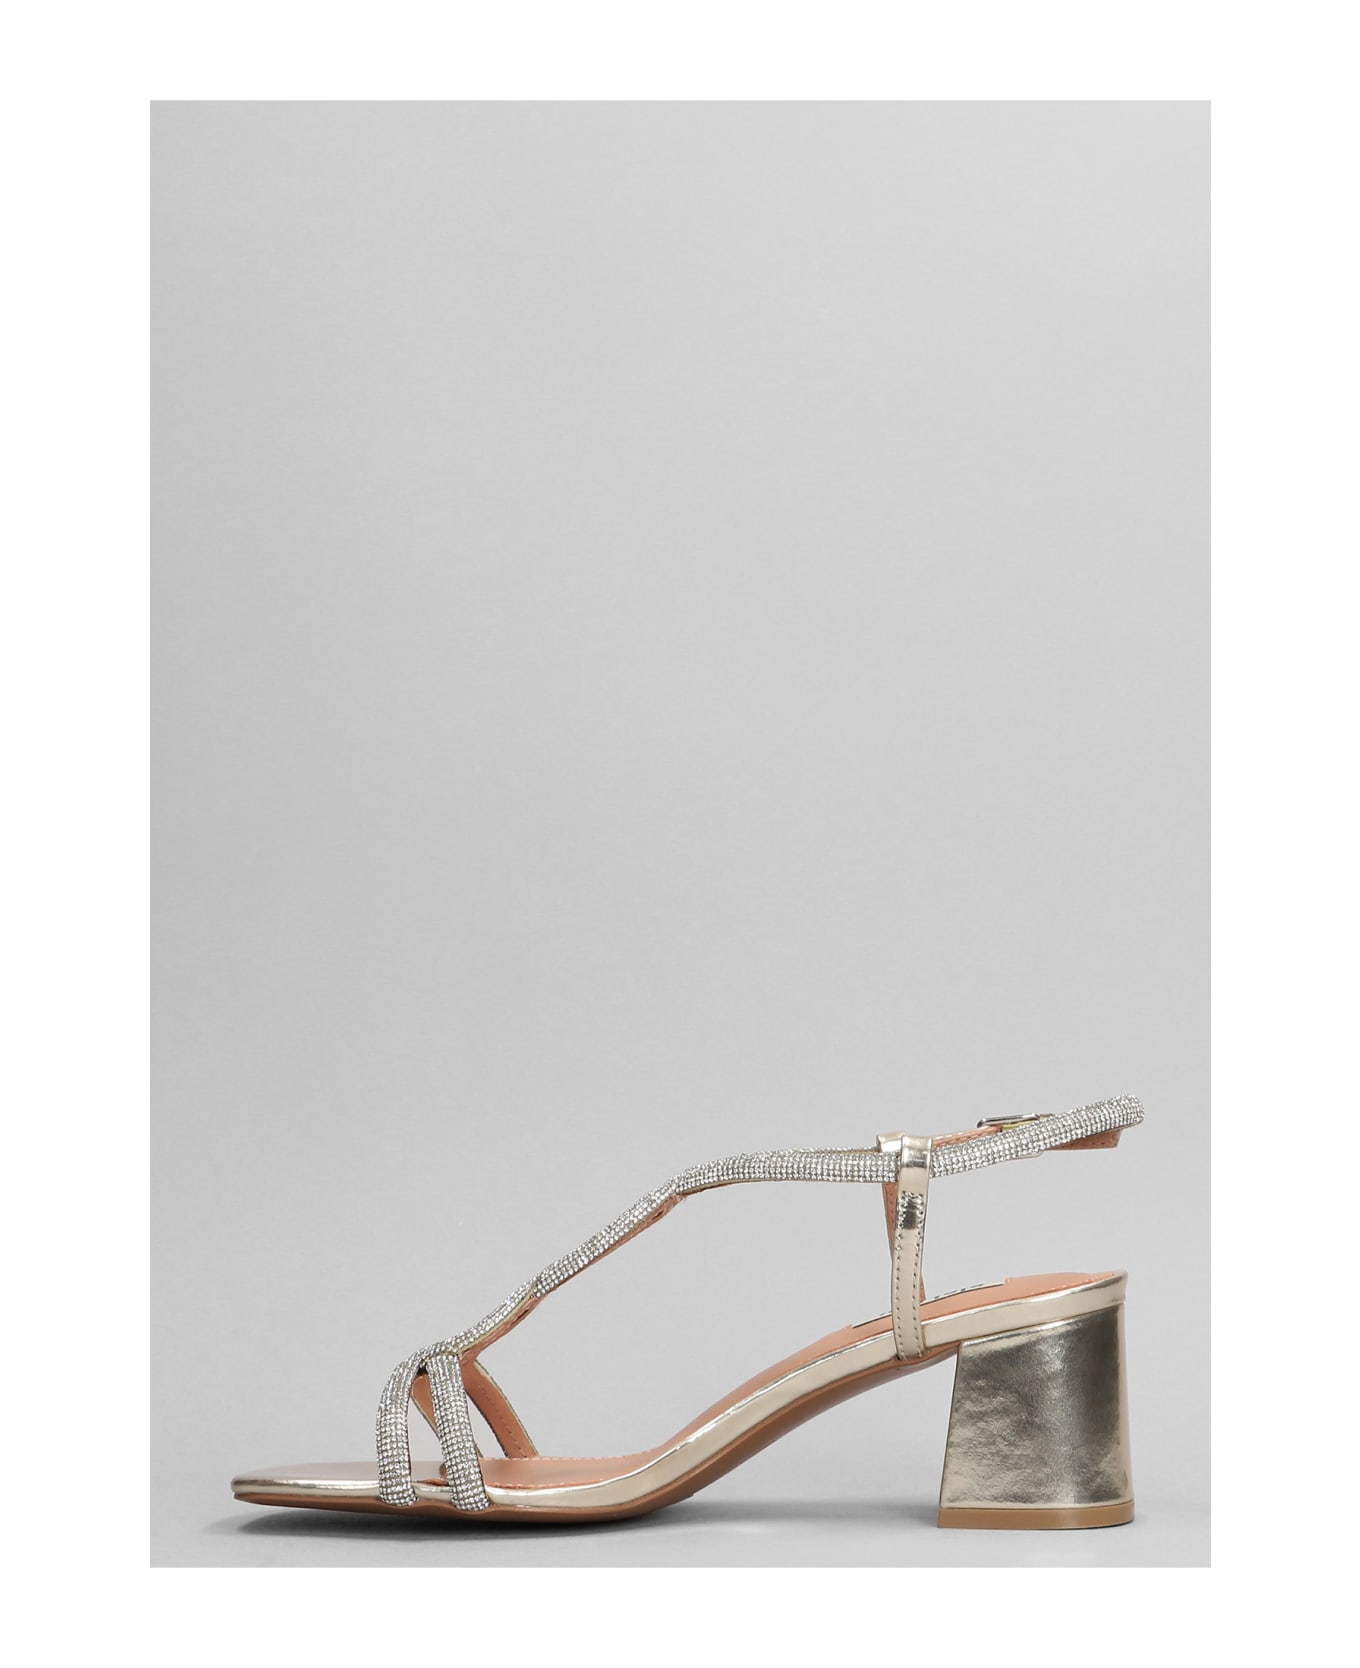 Bibi Lou Tansy 60 Sandals In Gold Leather - gold